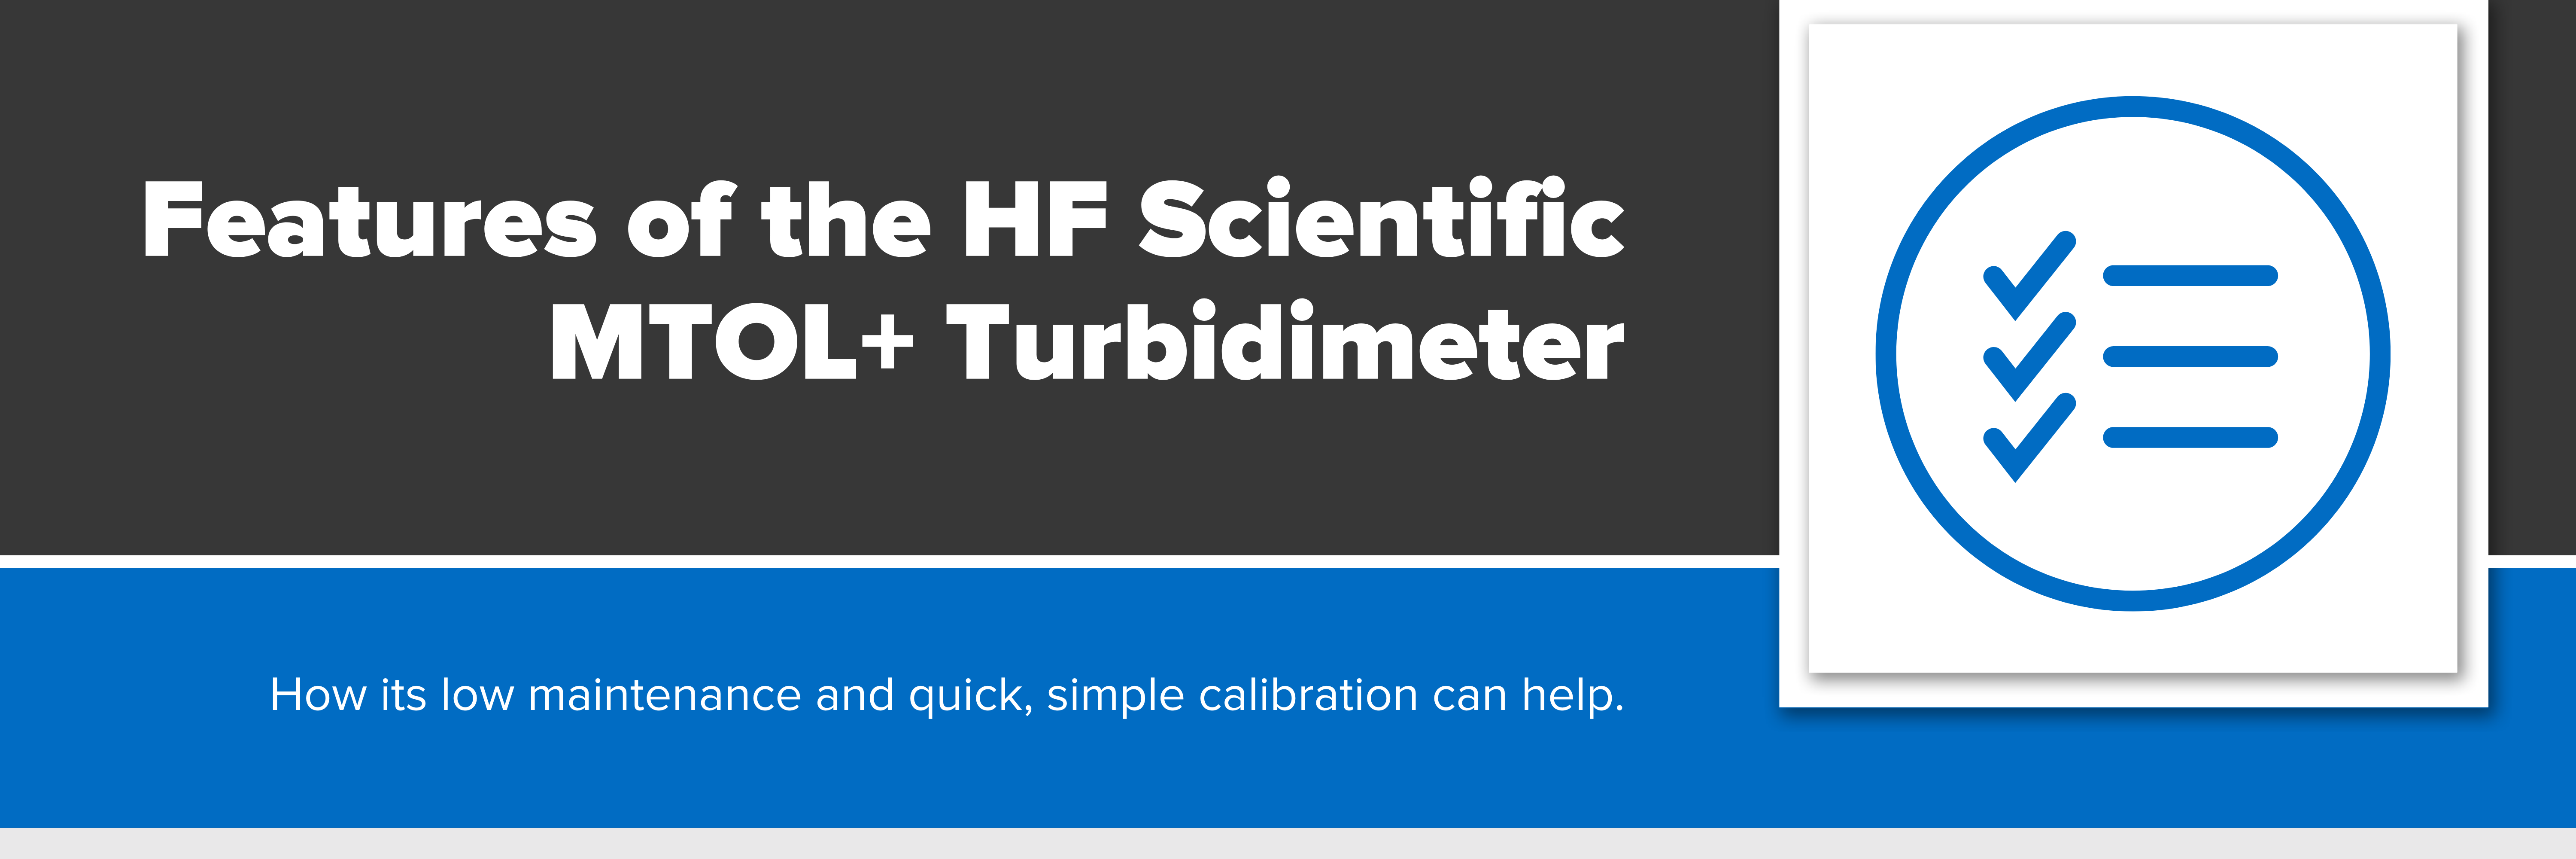 Header image with text: Features of the HF Scientific MTOL+ Turbidimeter 